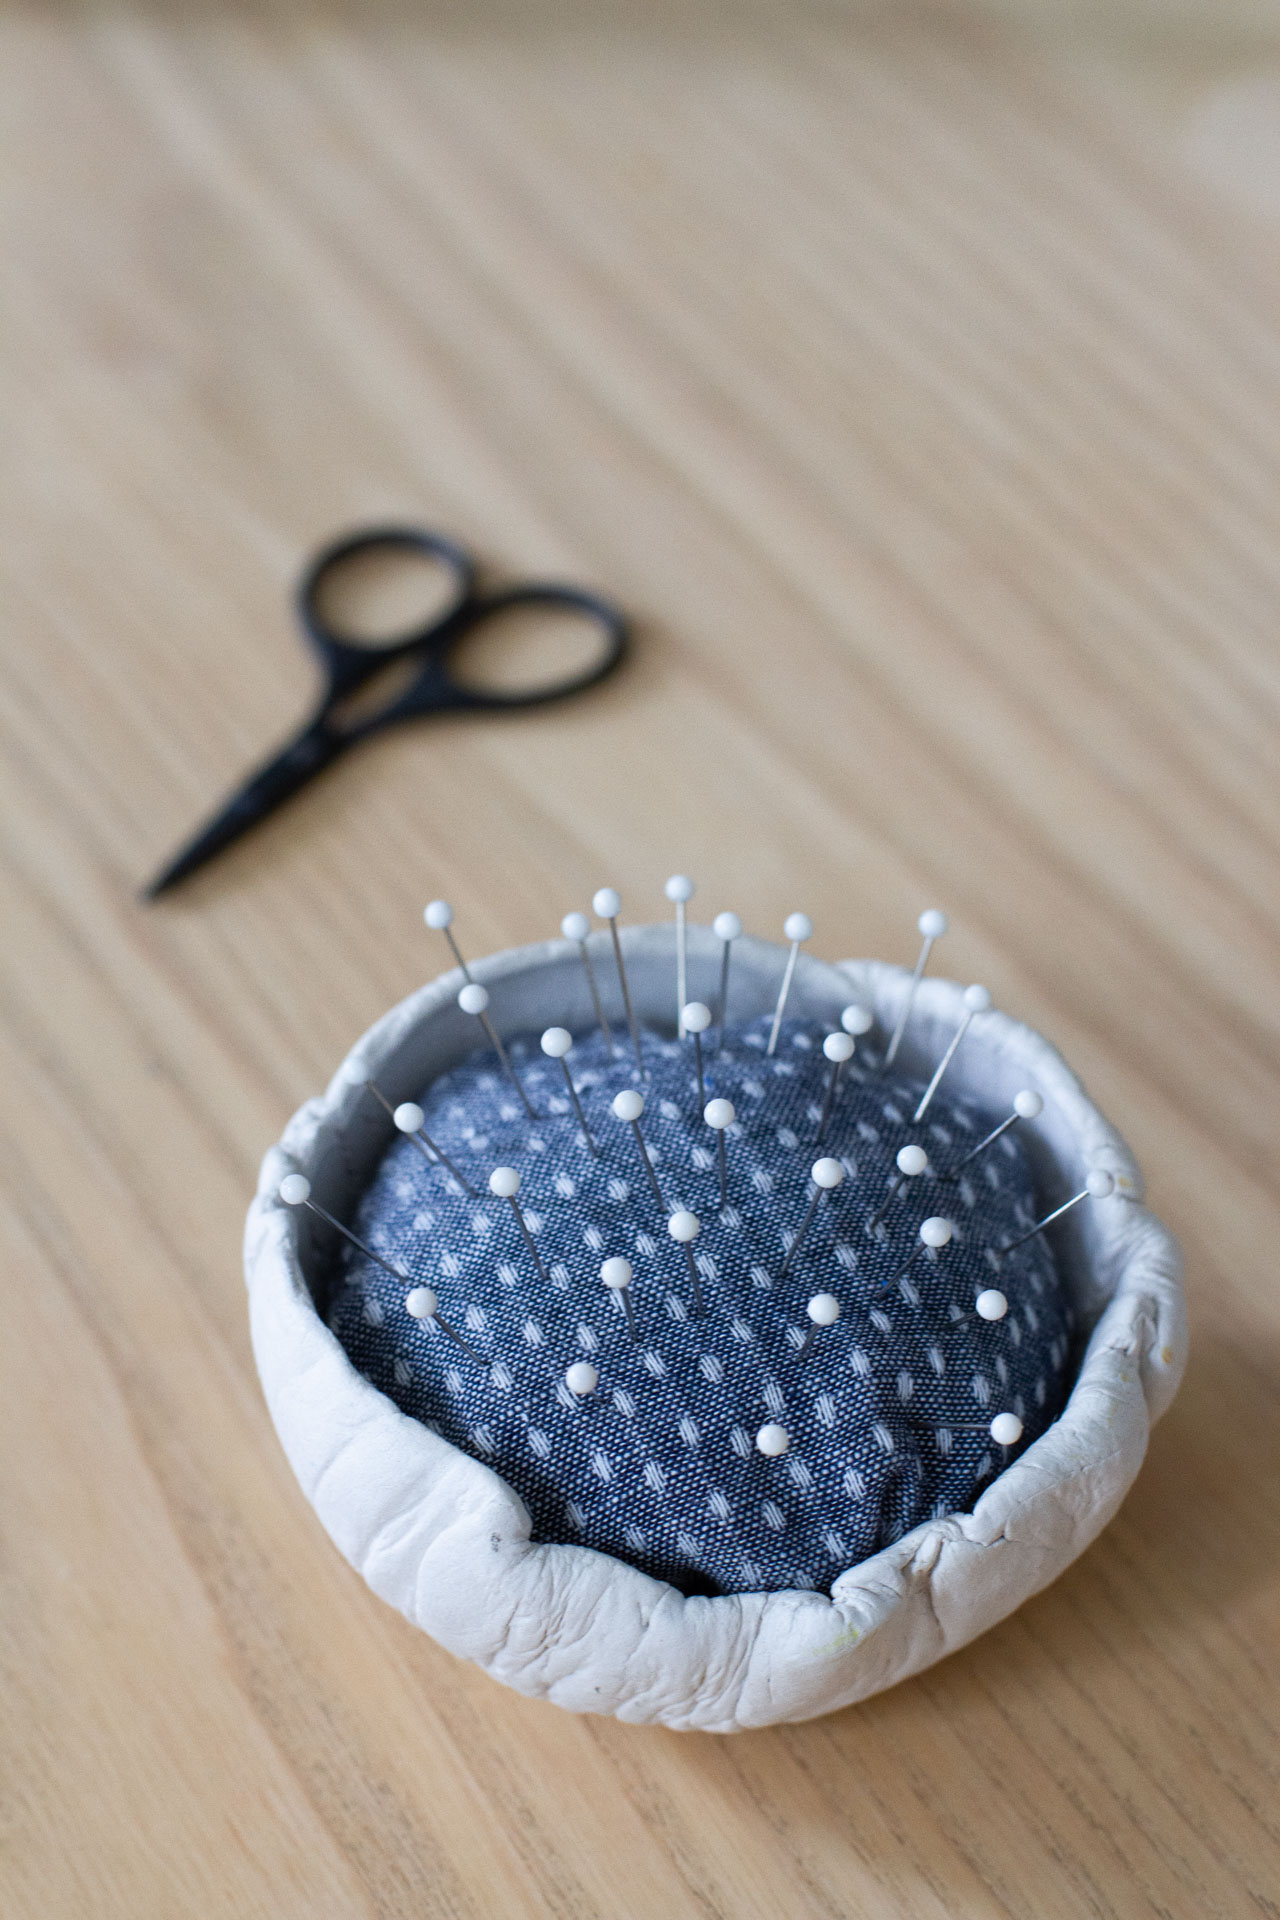 make your own: pincushion. – Reading My Tea Leaves – Slow, simple